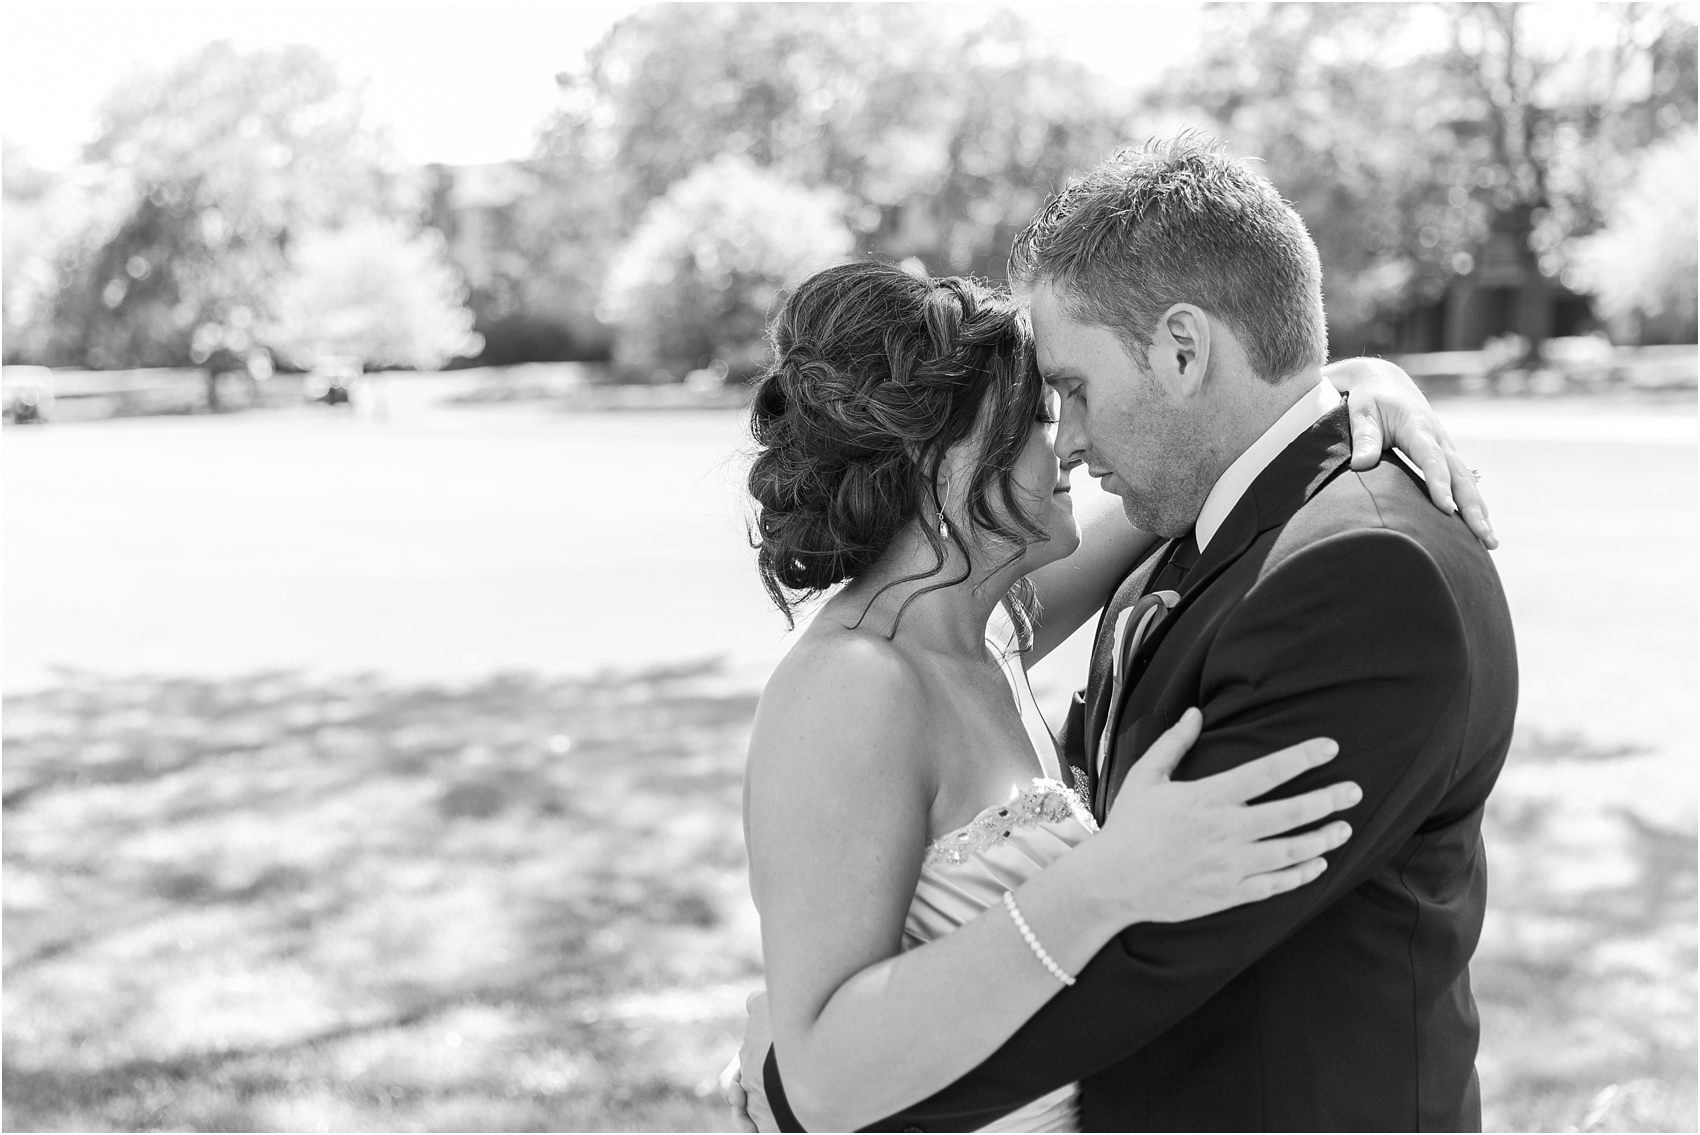 classic-wedding-photos-at-great-oaks-country-club-in-rochester-hills-mi-by-courtney-carolyn-photography_0059.jpg